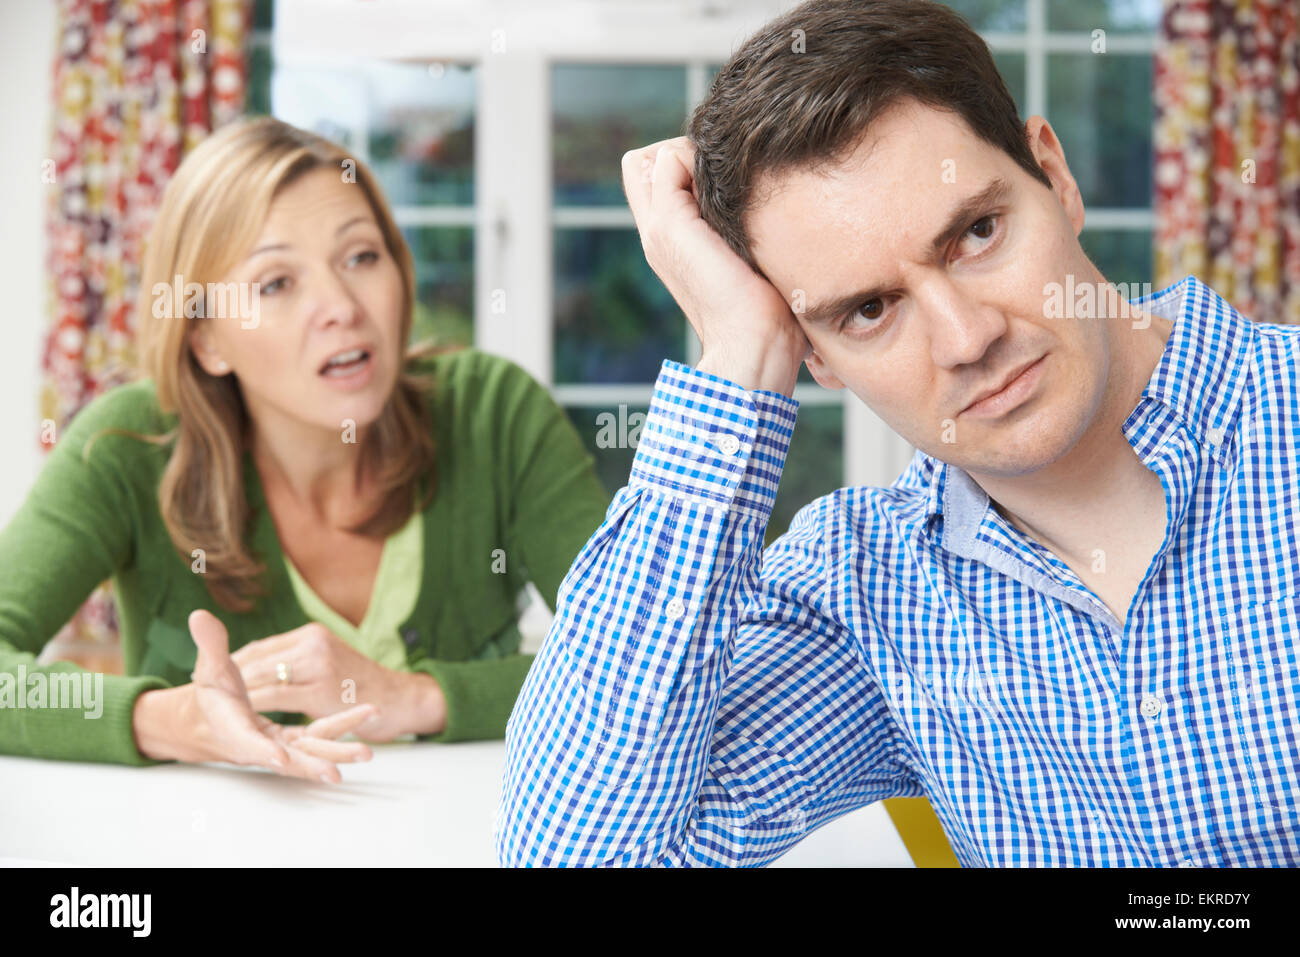 Mature Couple Having Argument At Home Stock Photo